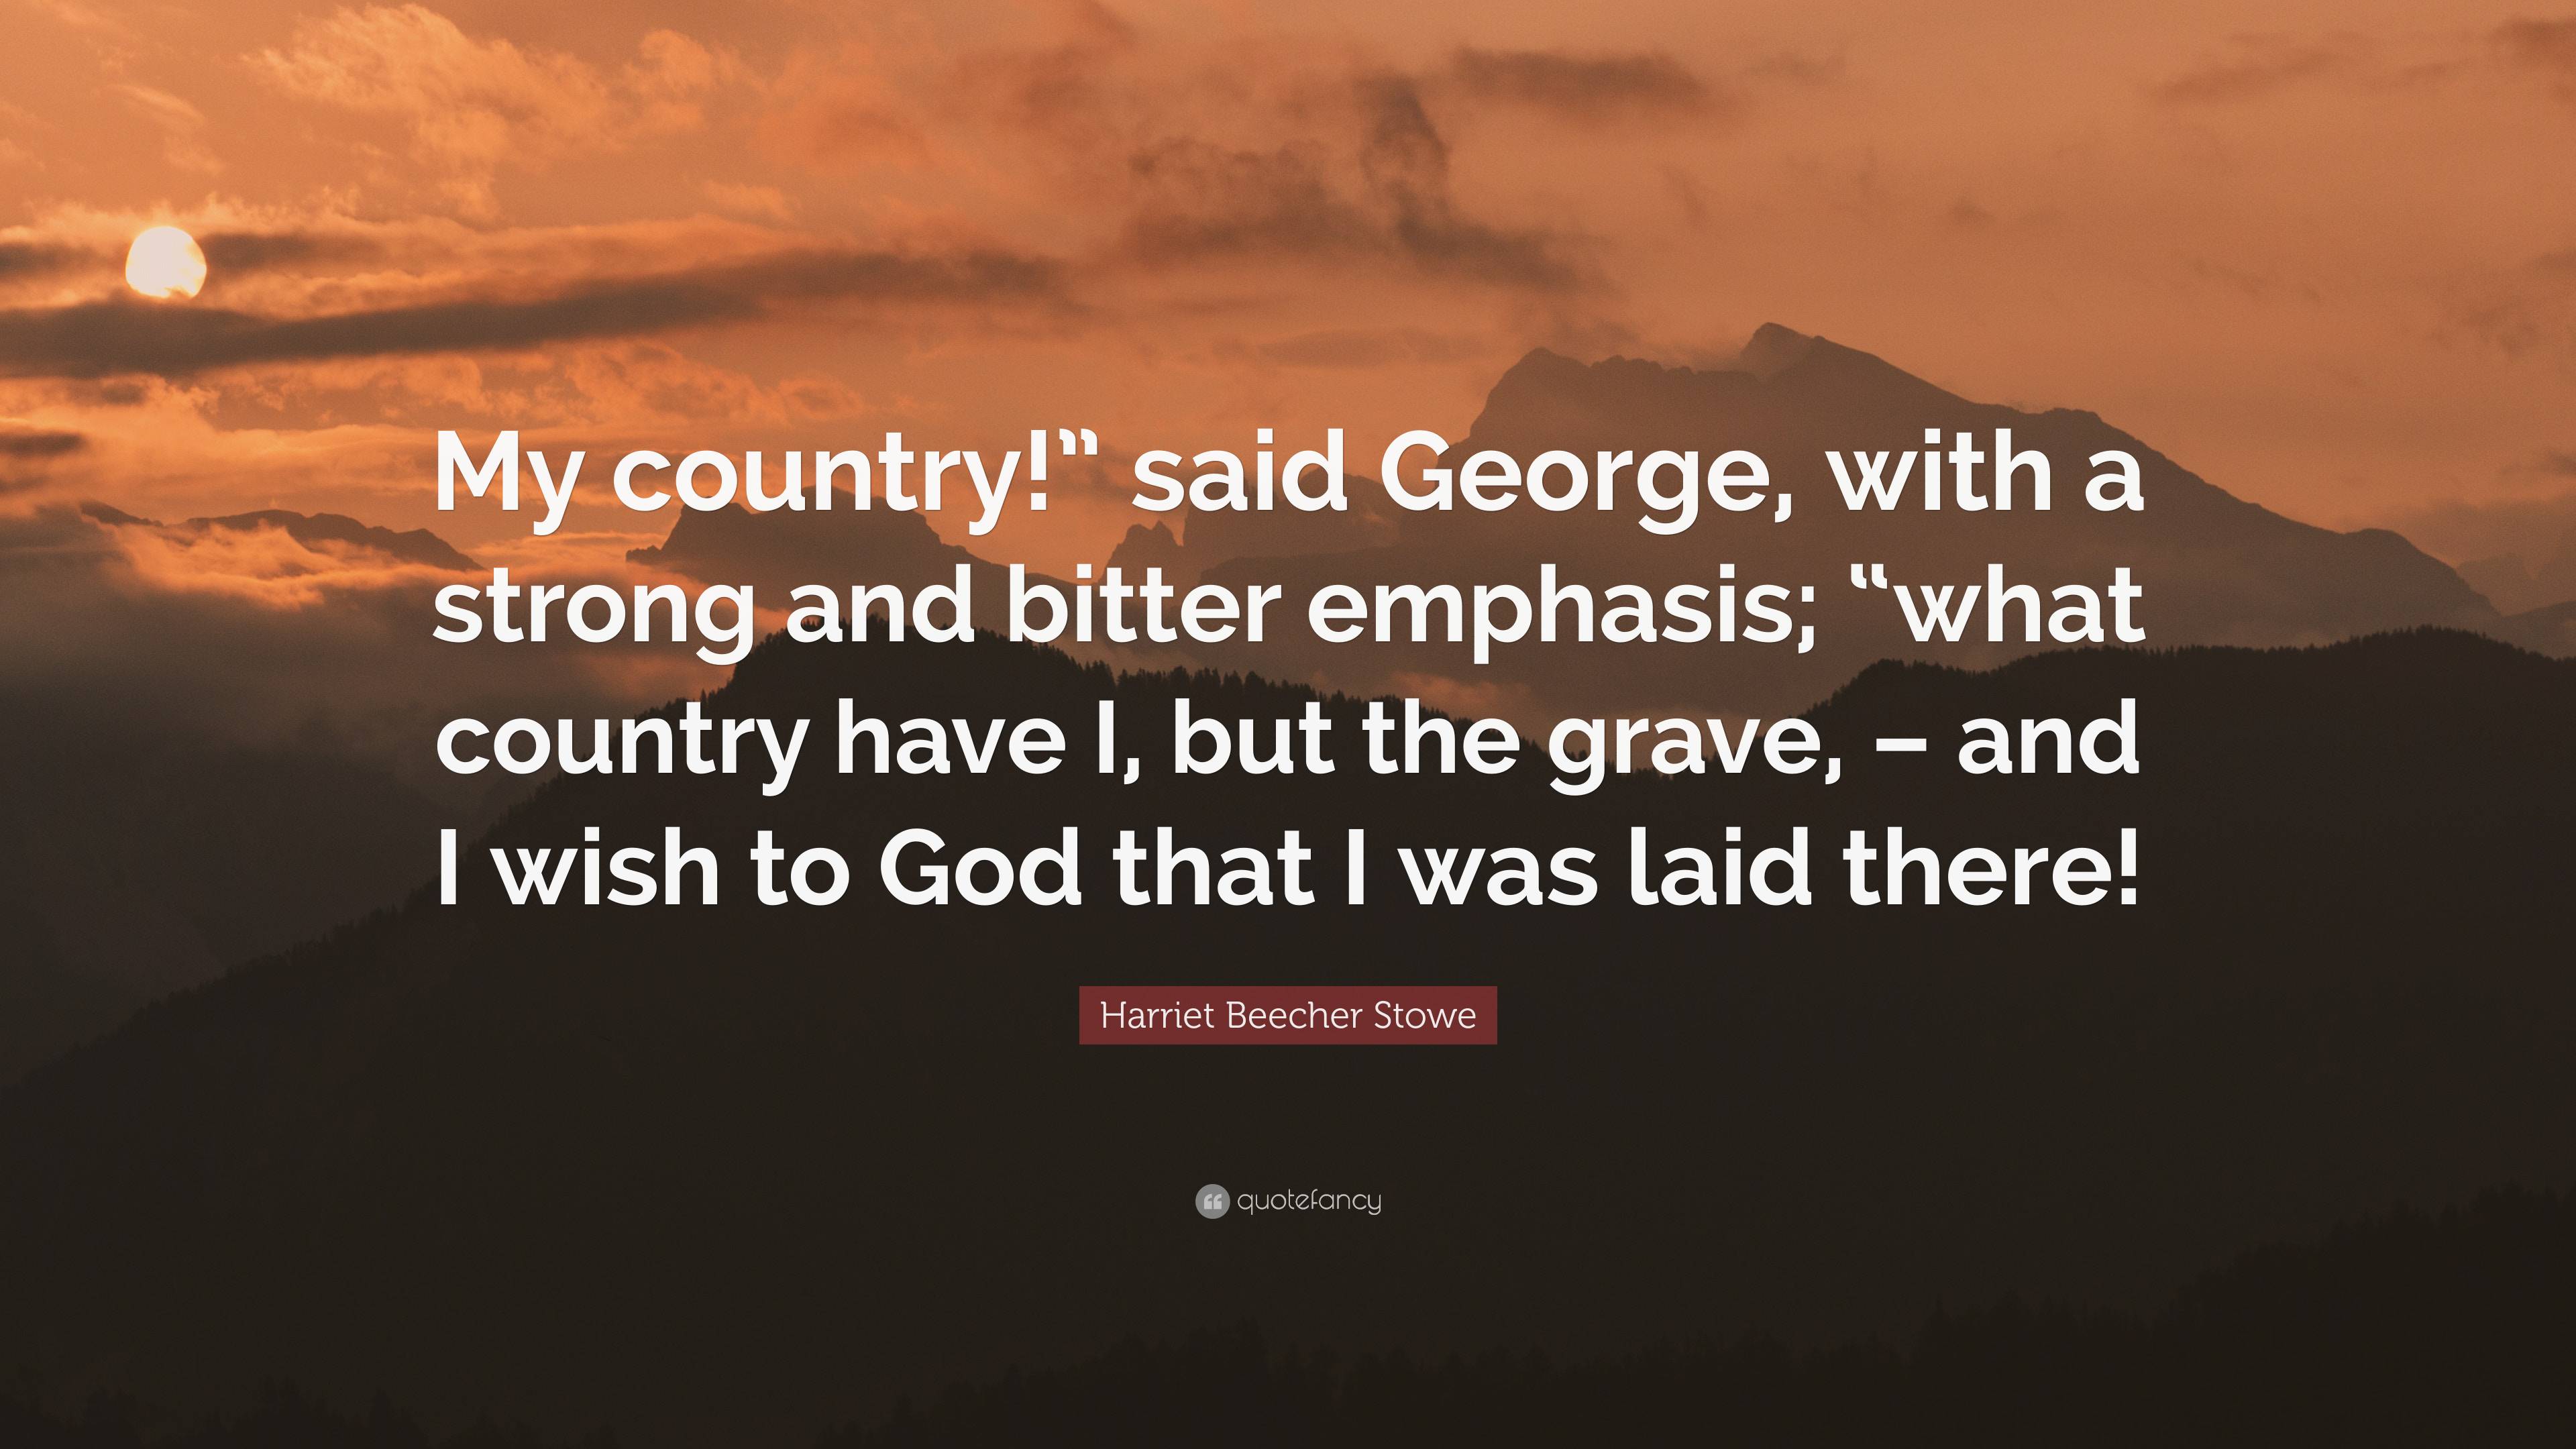 Harriet Beecher Stowe Quote: “My country!” said George, with a strong ...